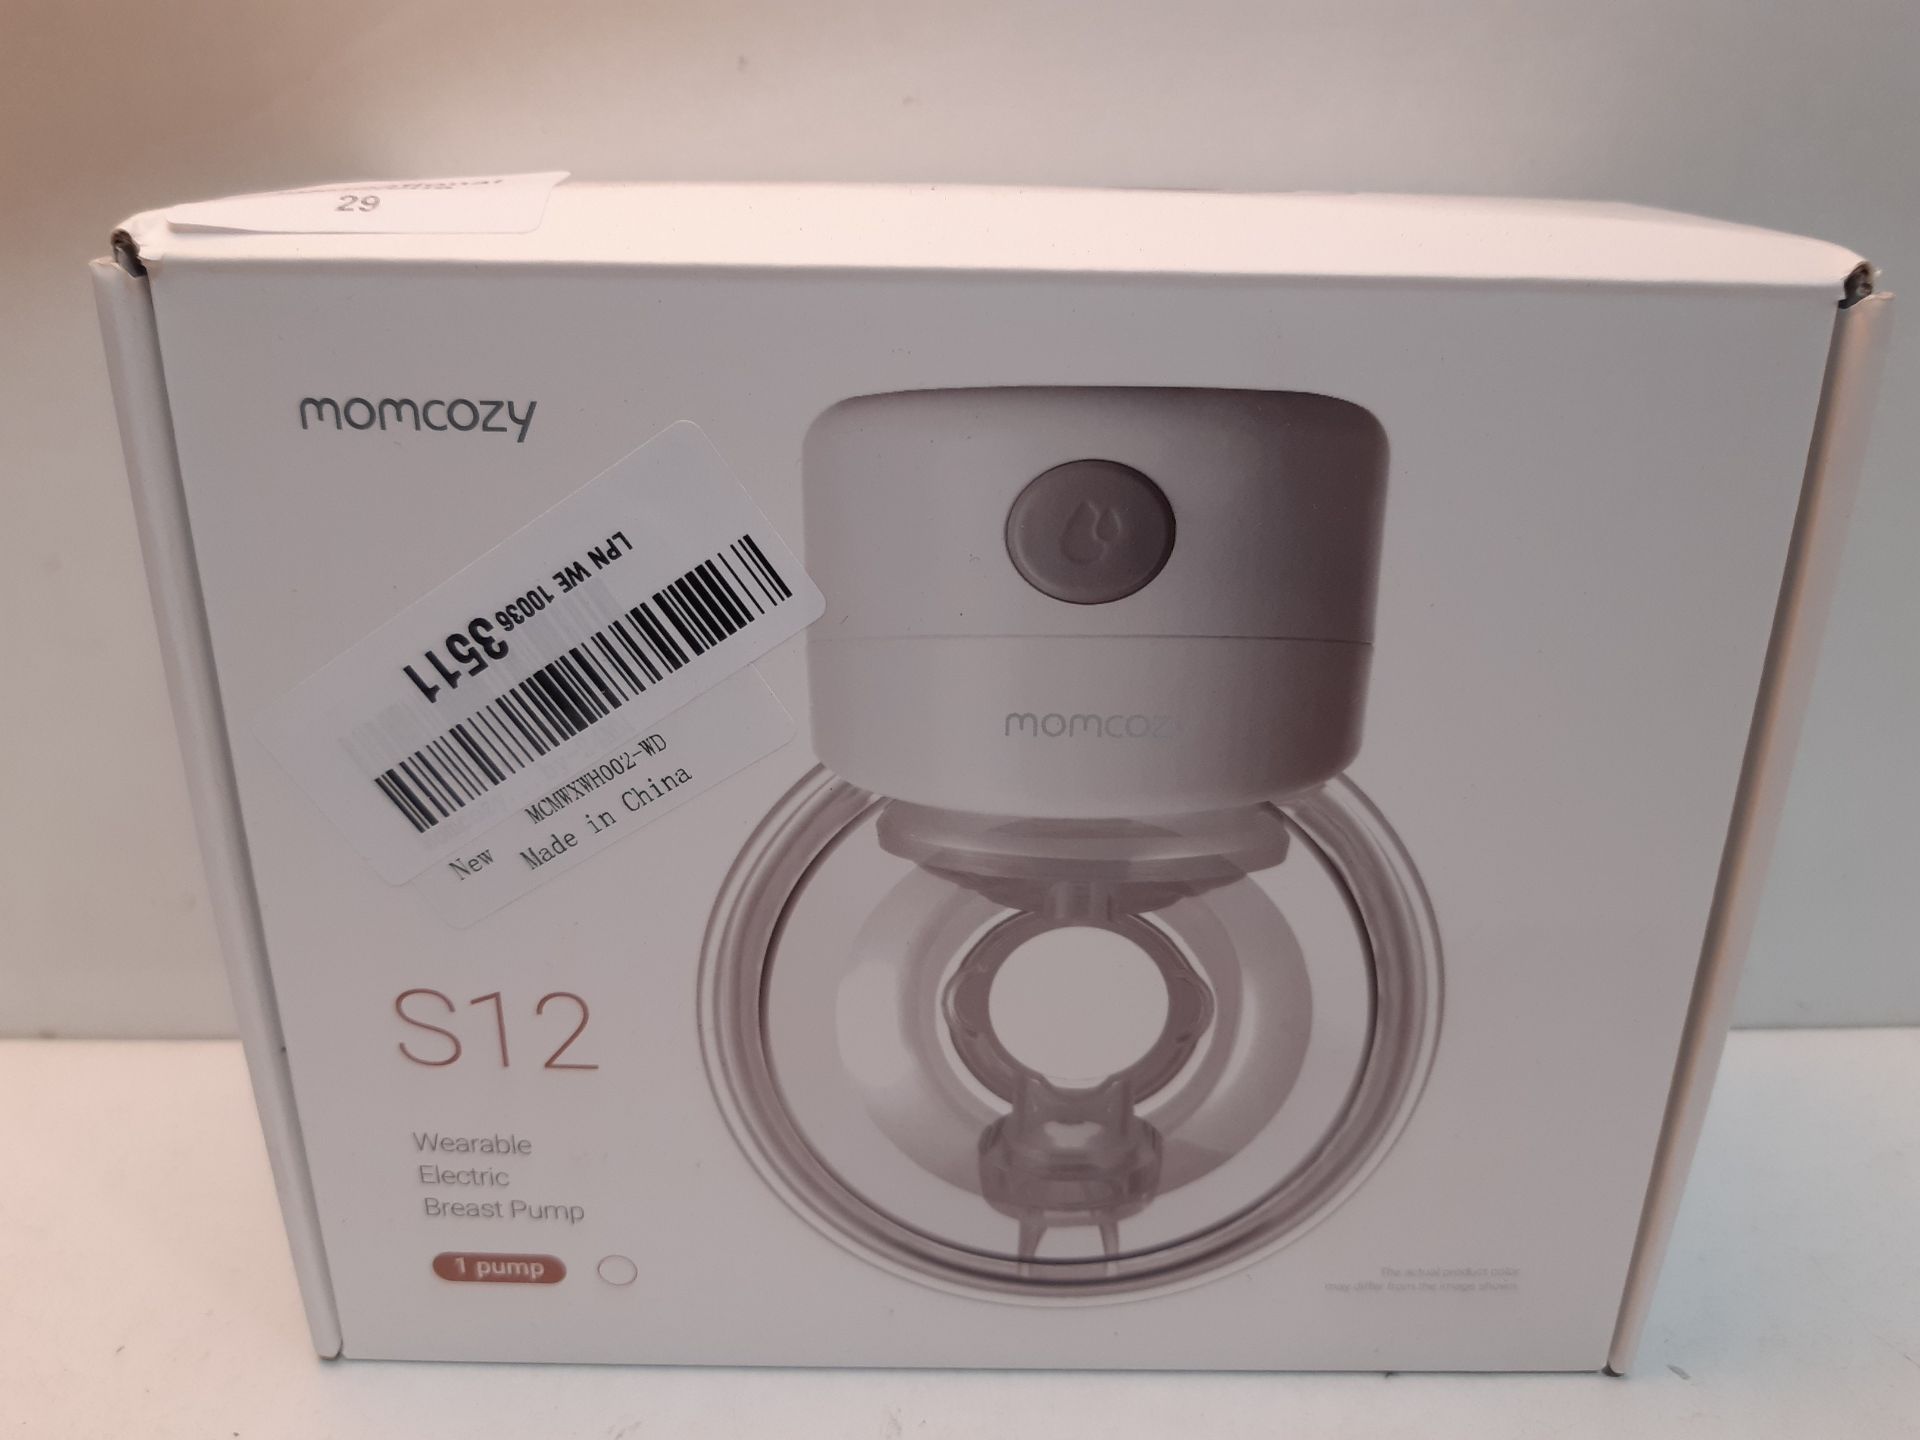 RRP £62.12 Momcozy Wearable Breast Pump S12 - Image 2 of 2